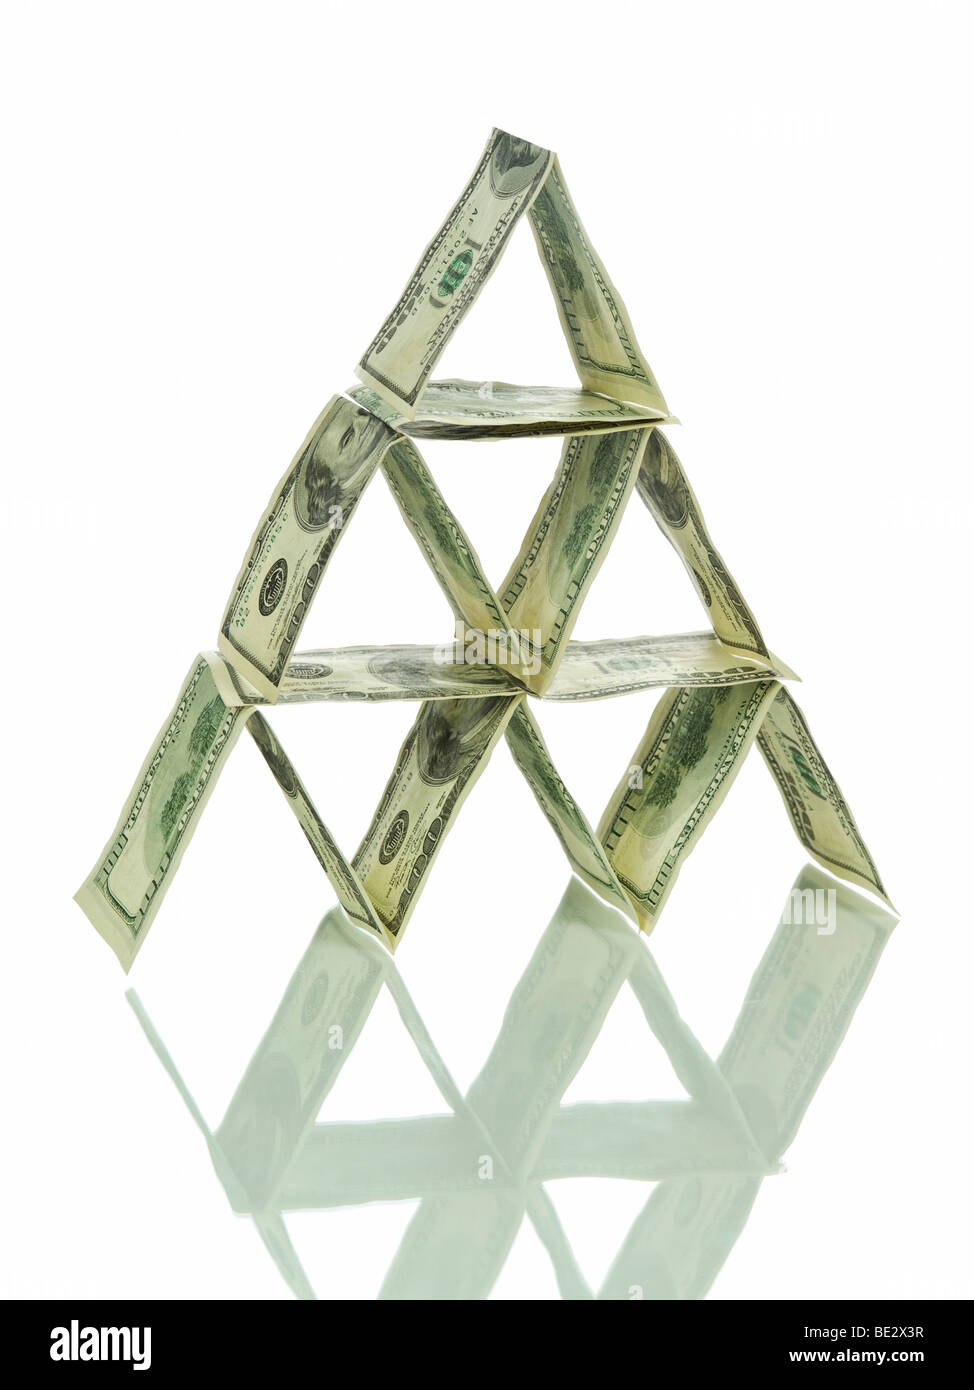 A pyramid made out of one hundred dollar bills and its reflection. Isolated on white. Stock Photo